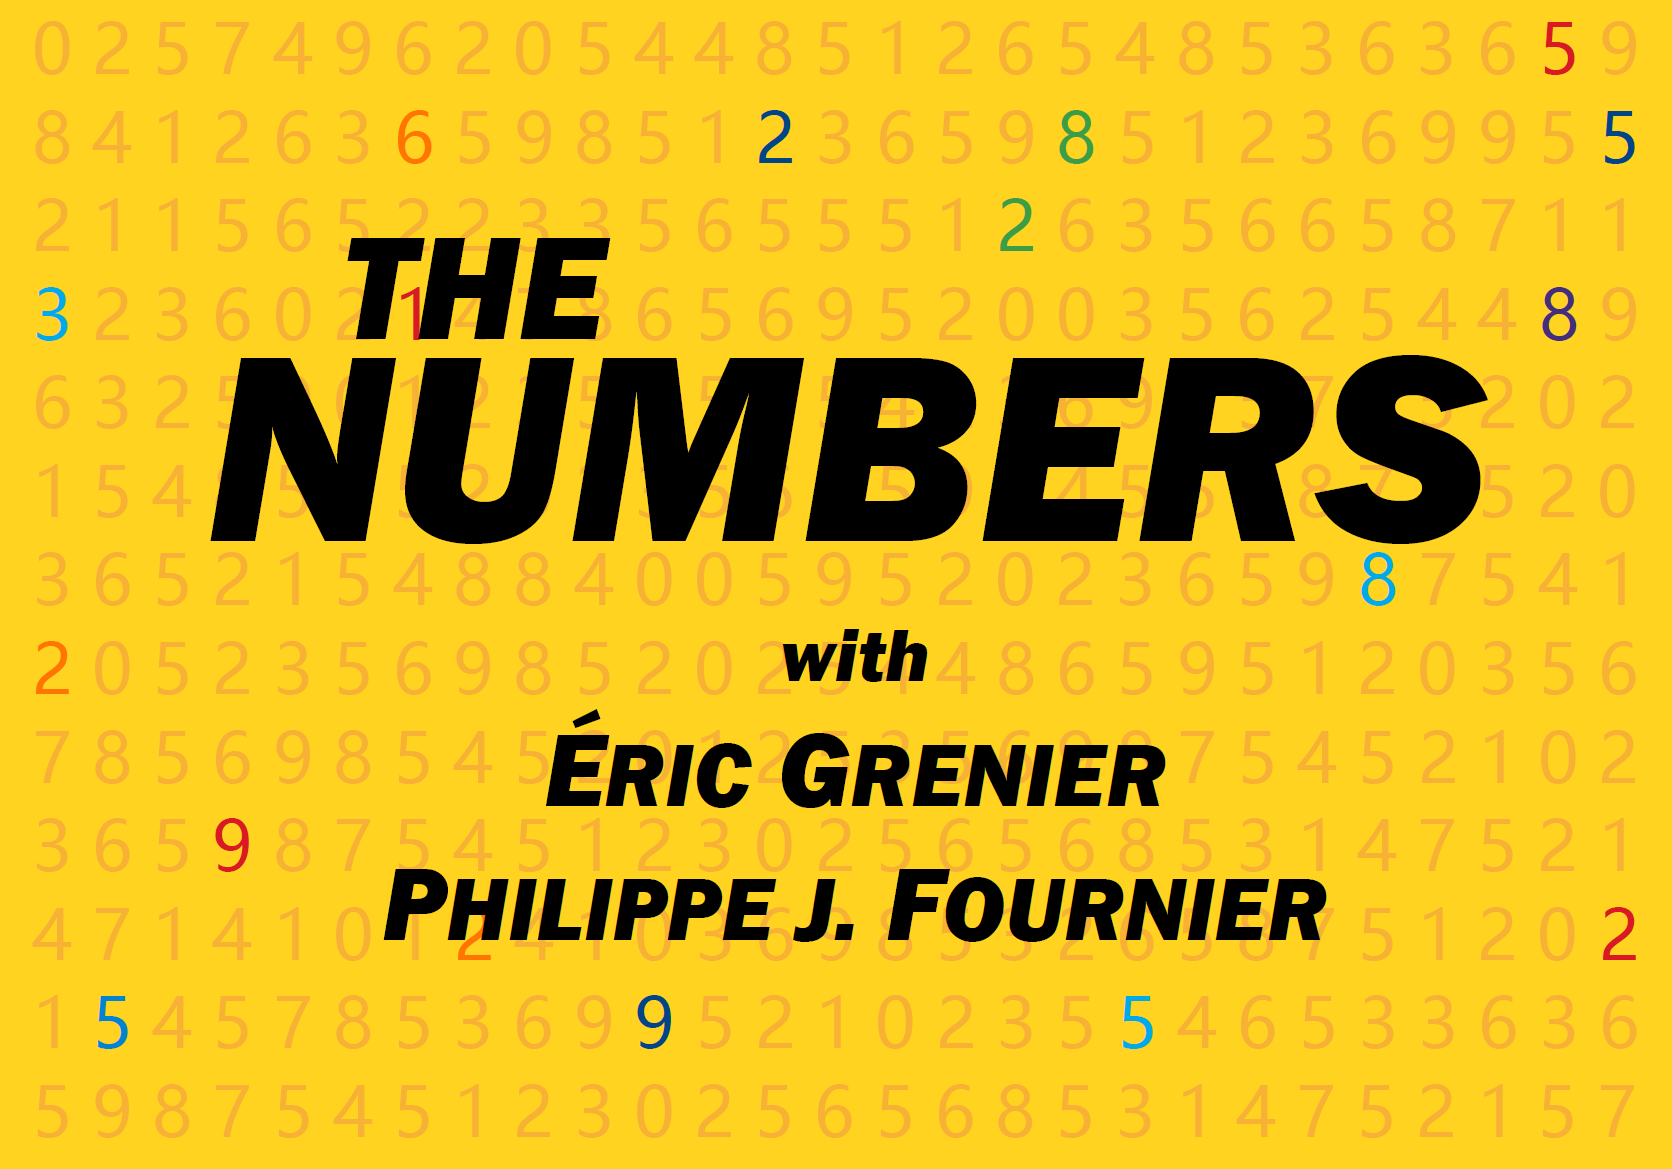 The Numbers: A new trend or another blip?